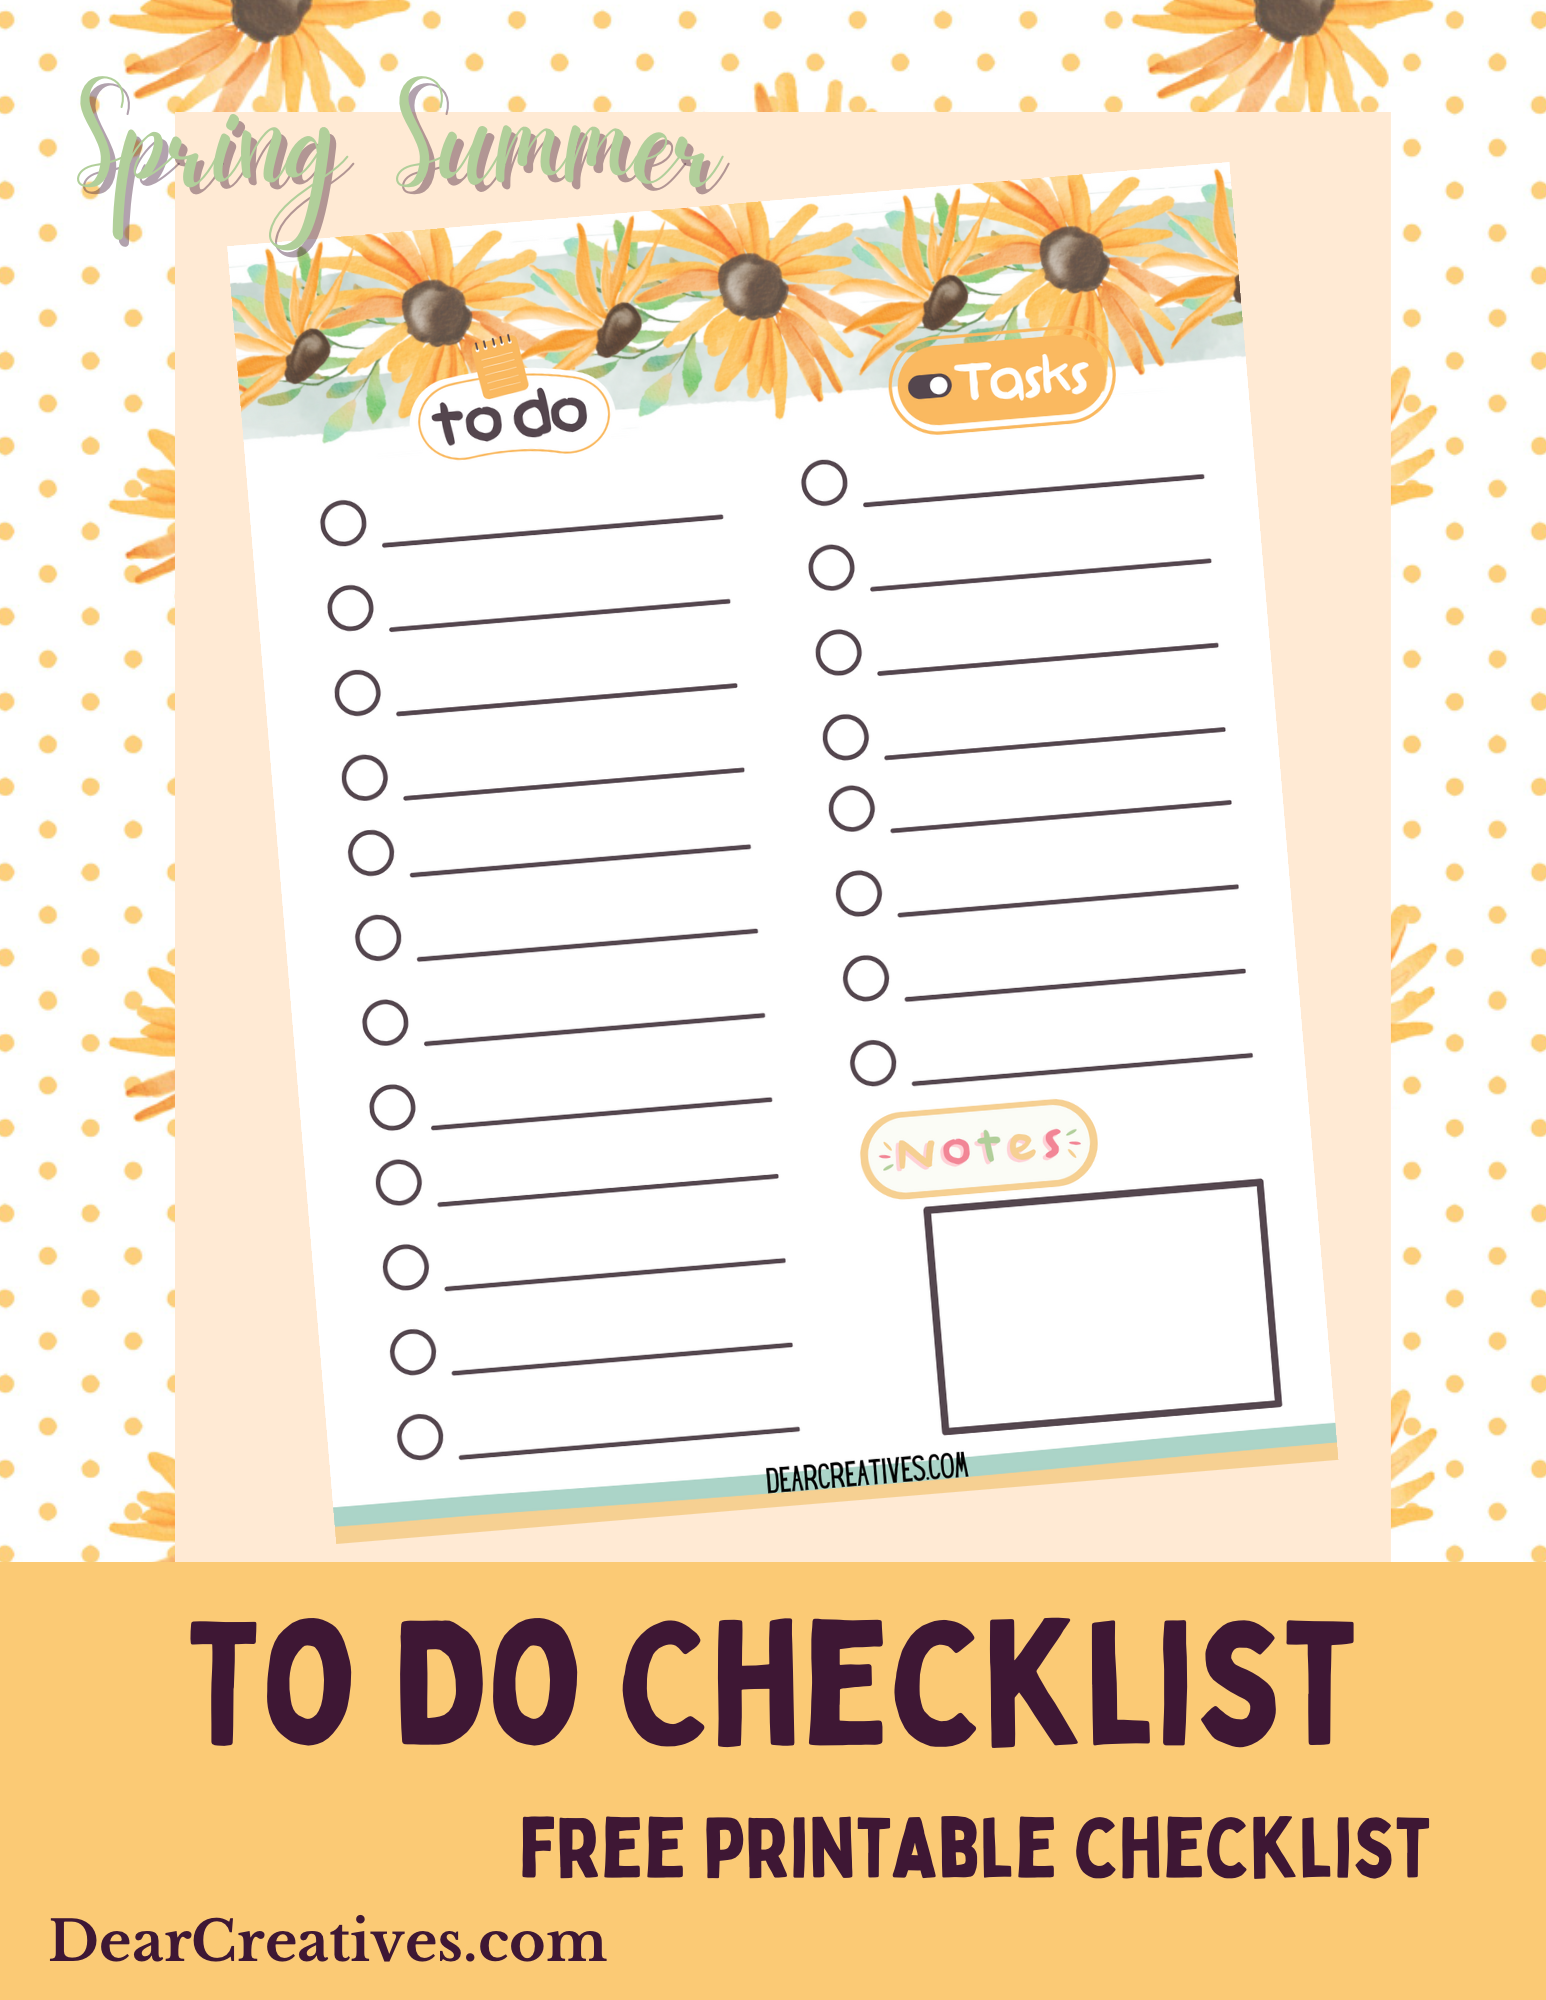 To Do Checklist Printable - With pretty flower design. Use this pretty checklist with boxes and lines to make and check off your to do lists. Find this and more printables at DearCreatives.com